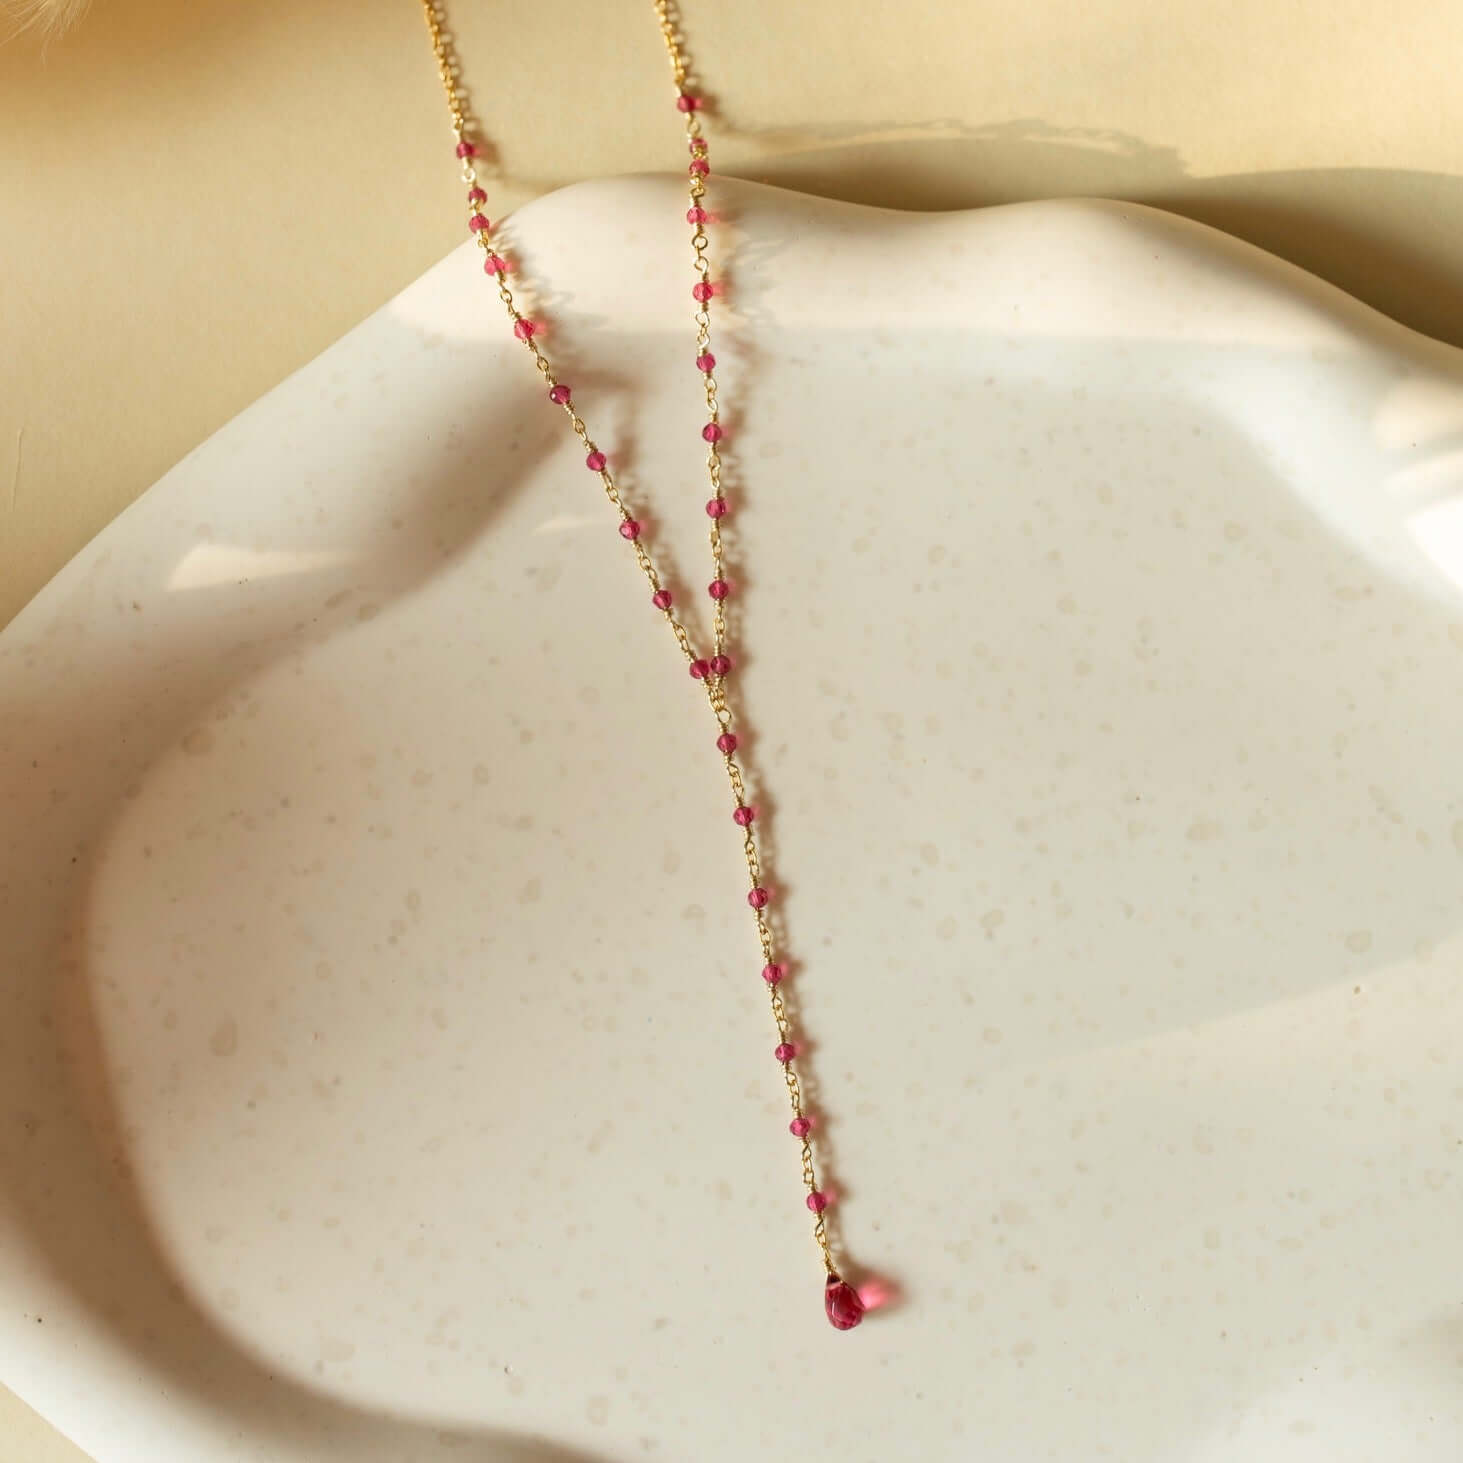 On a clay plate, the pink tourmaline quartz necklace adds a soft blush—a sweet and simple touch of natural elegance